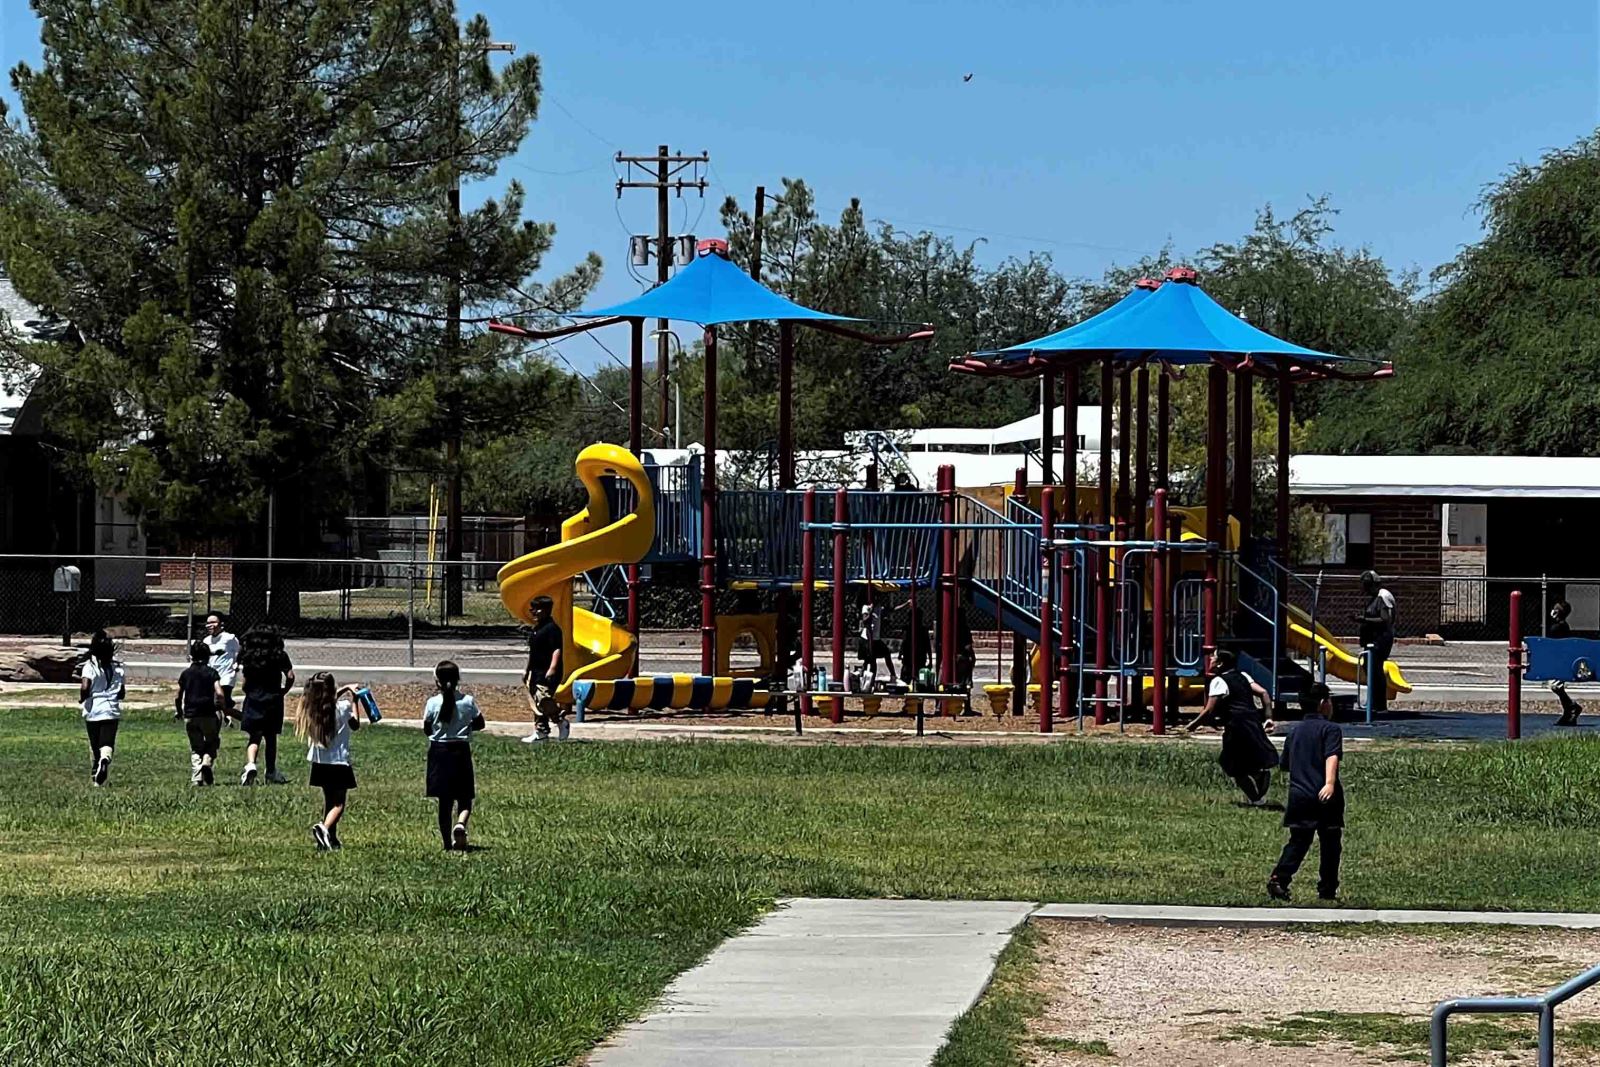 Lots of fun on the Pueblo Gardens playground on the first day of school!